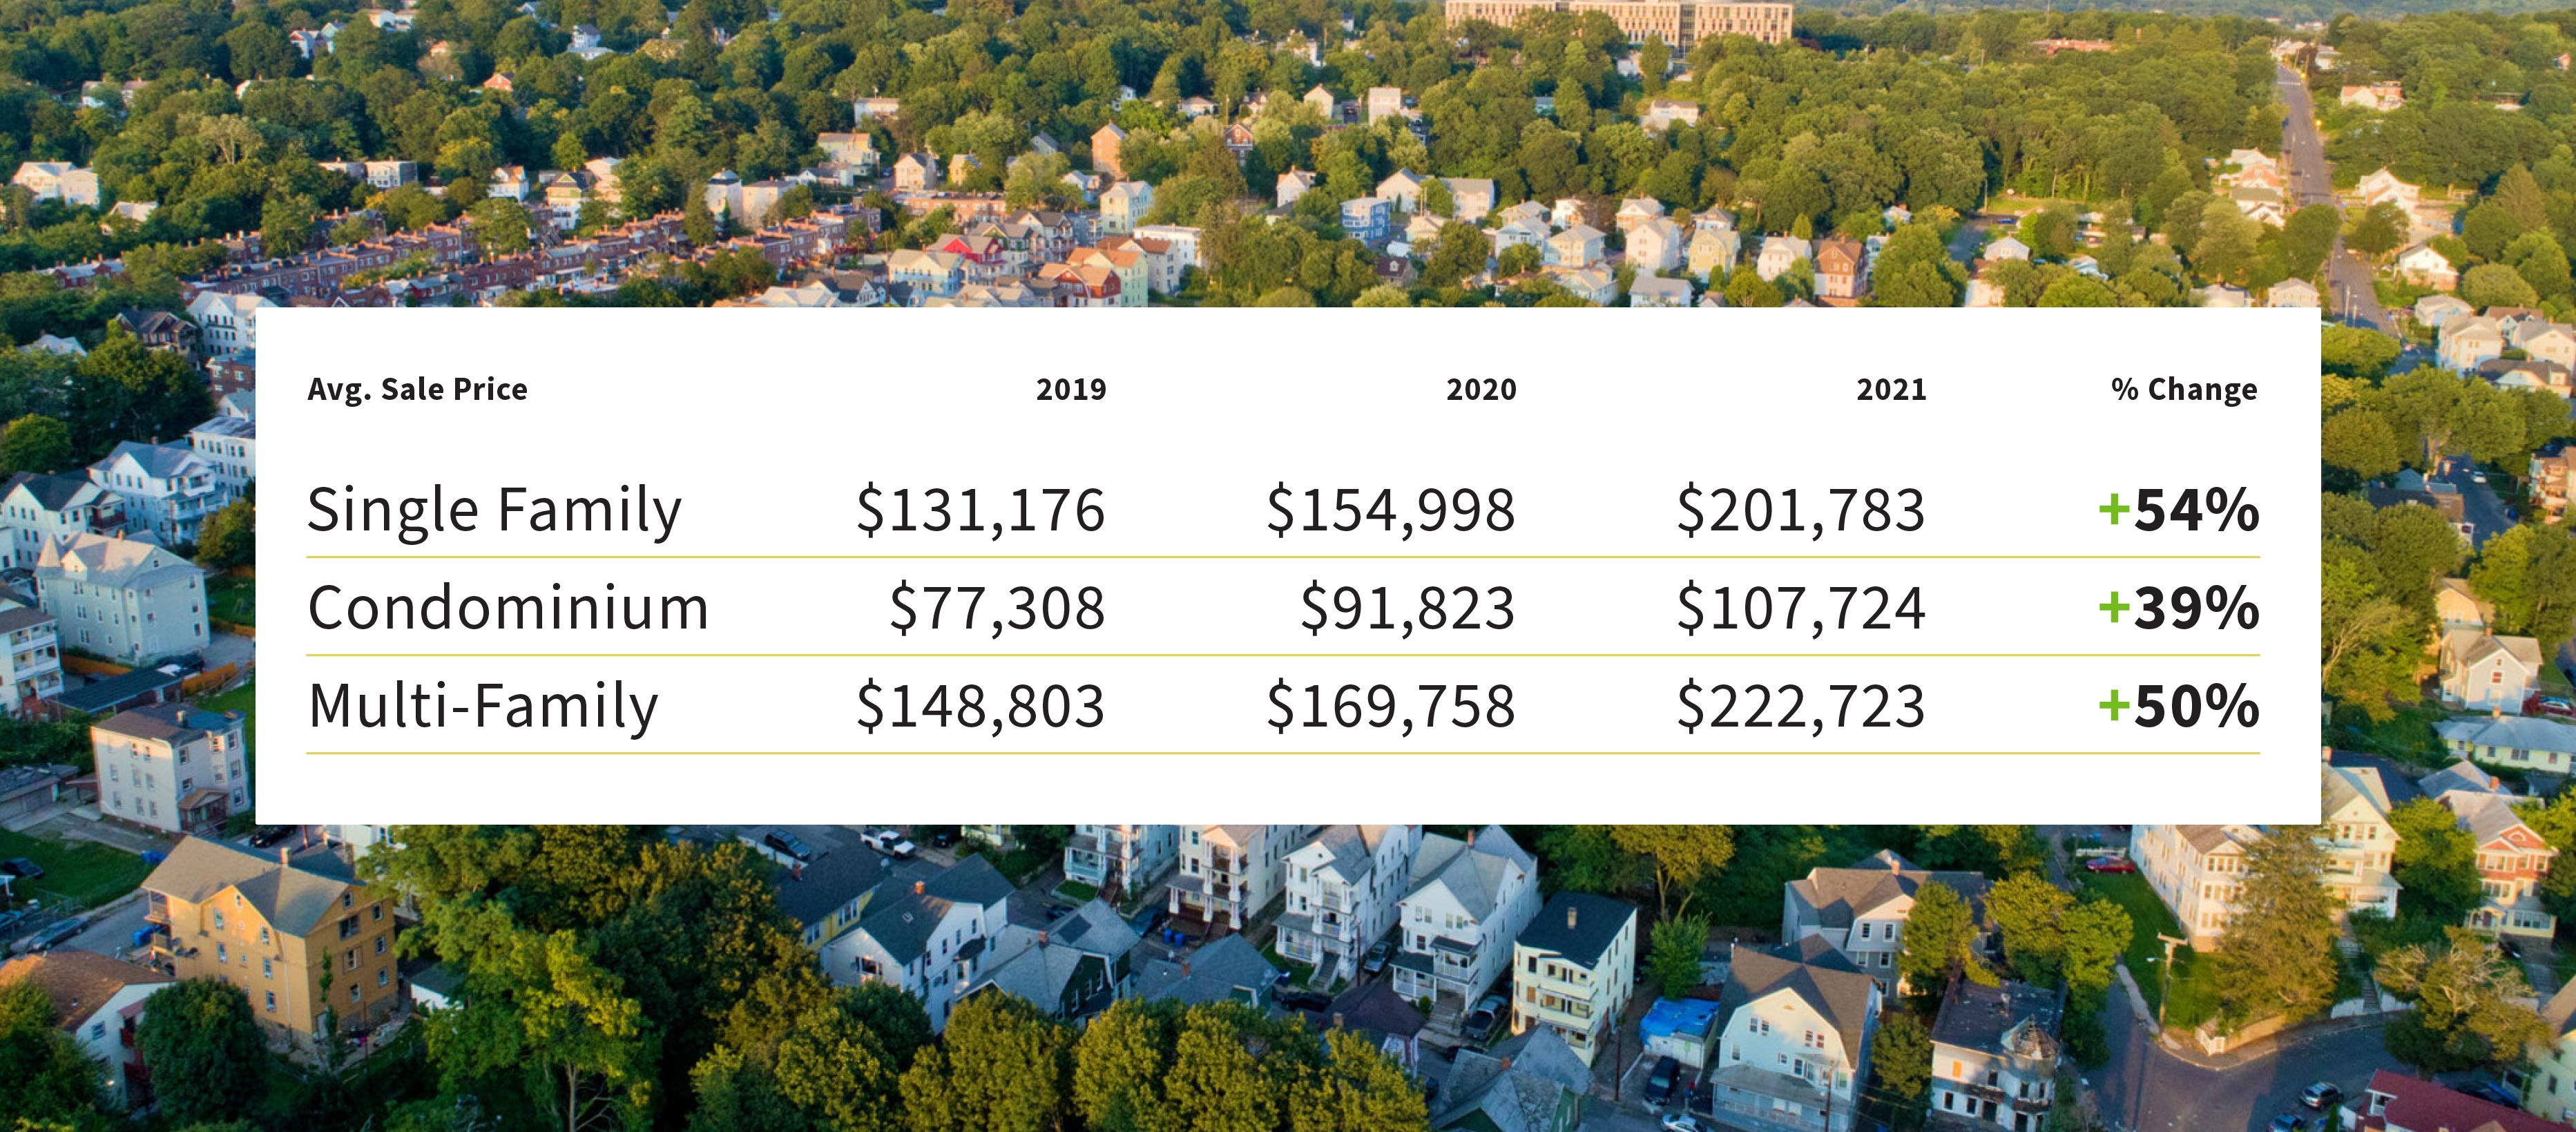 Infographic showing the increasing residential property values in Waterbury, CT